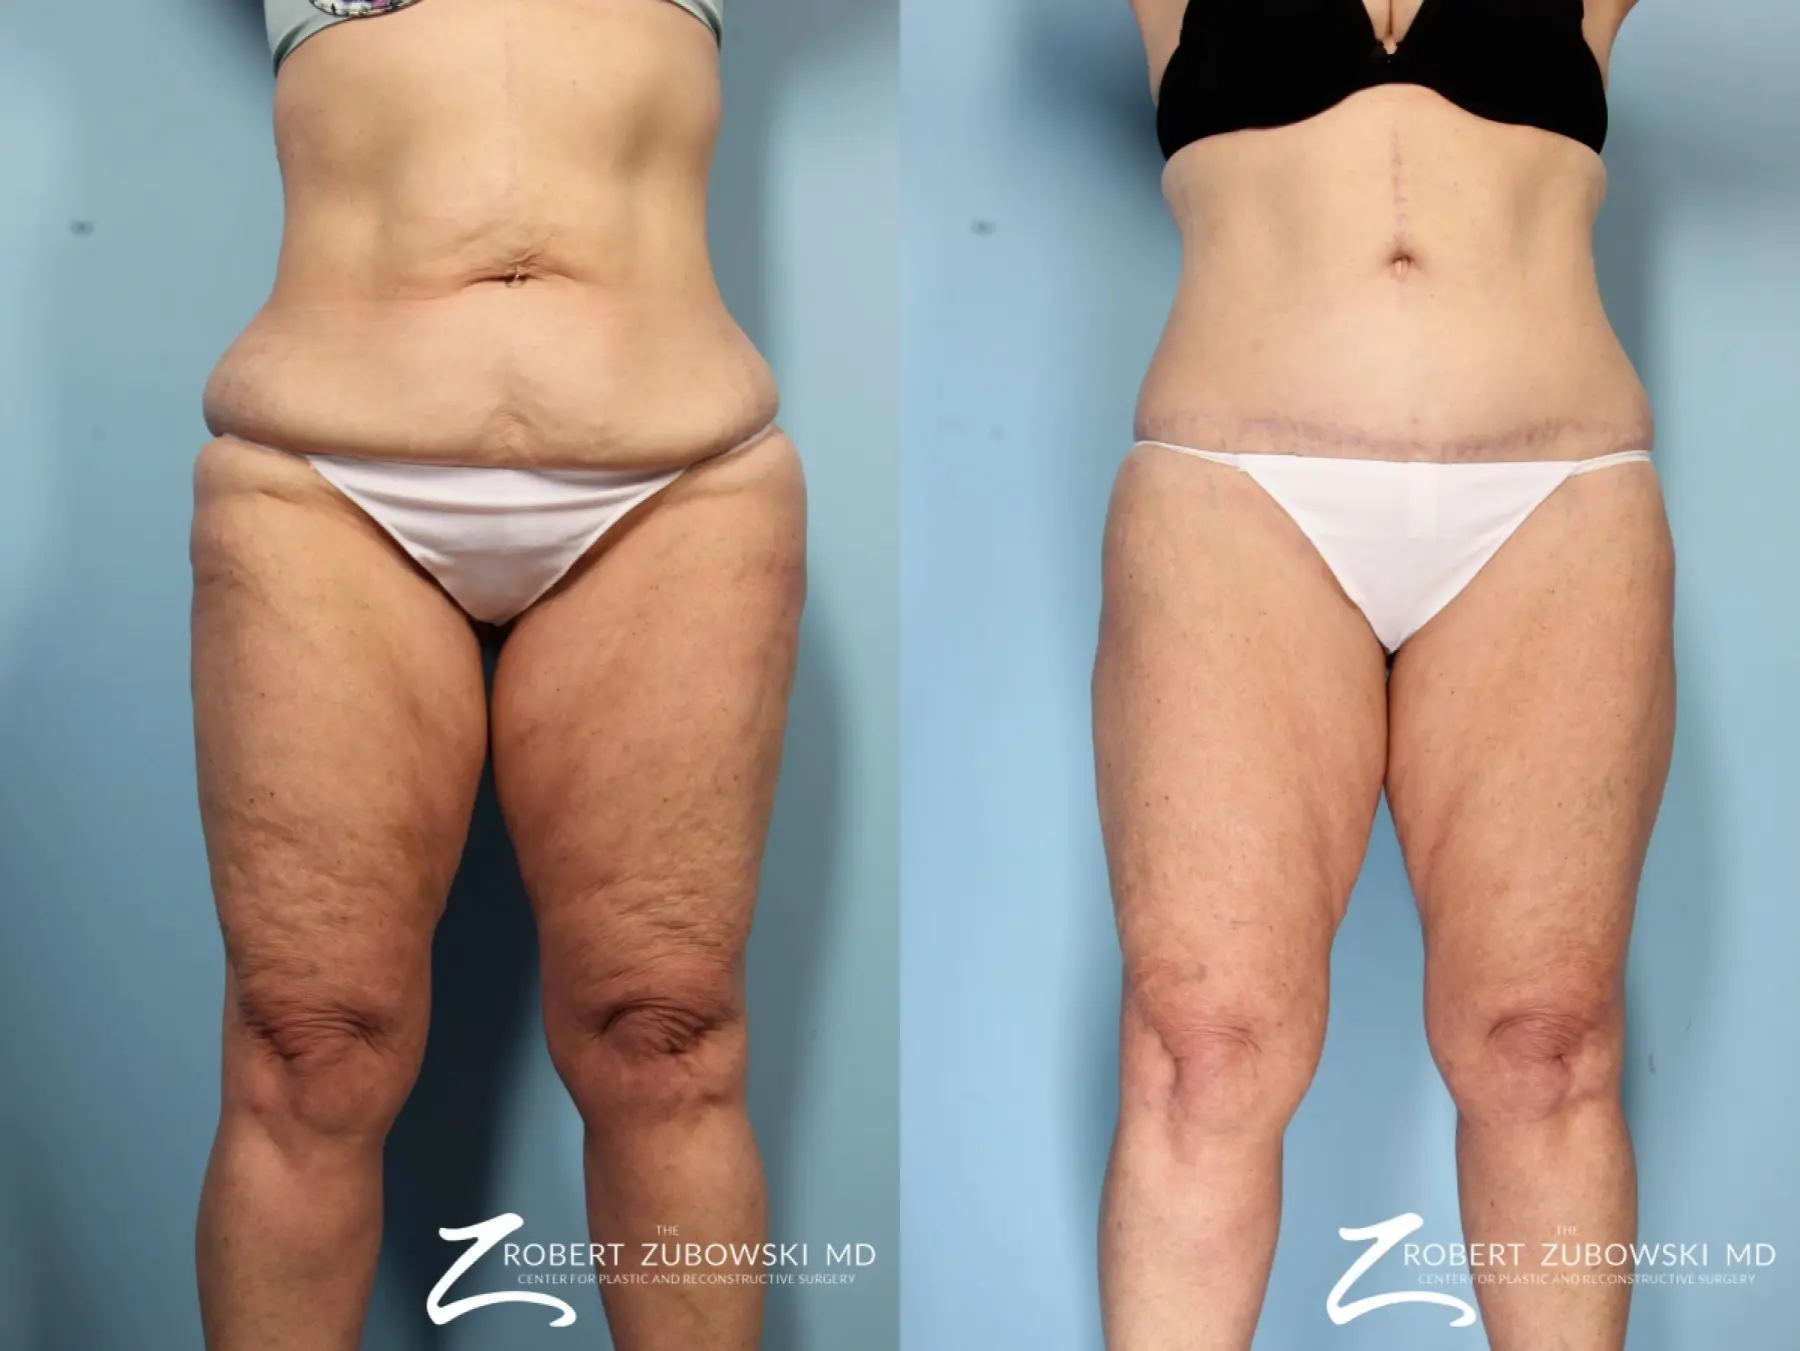 Body Lift Before & After Gallery: Patient 7